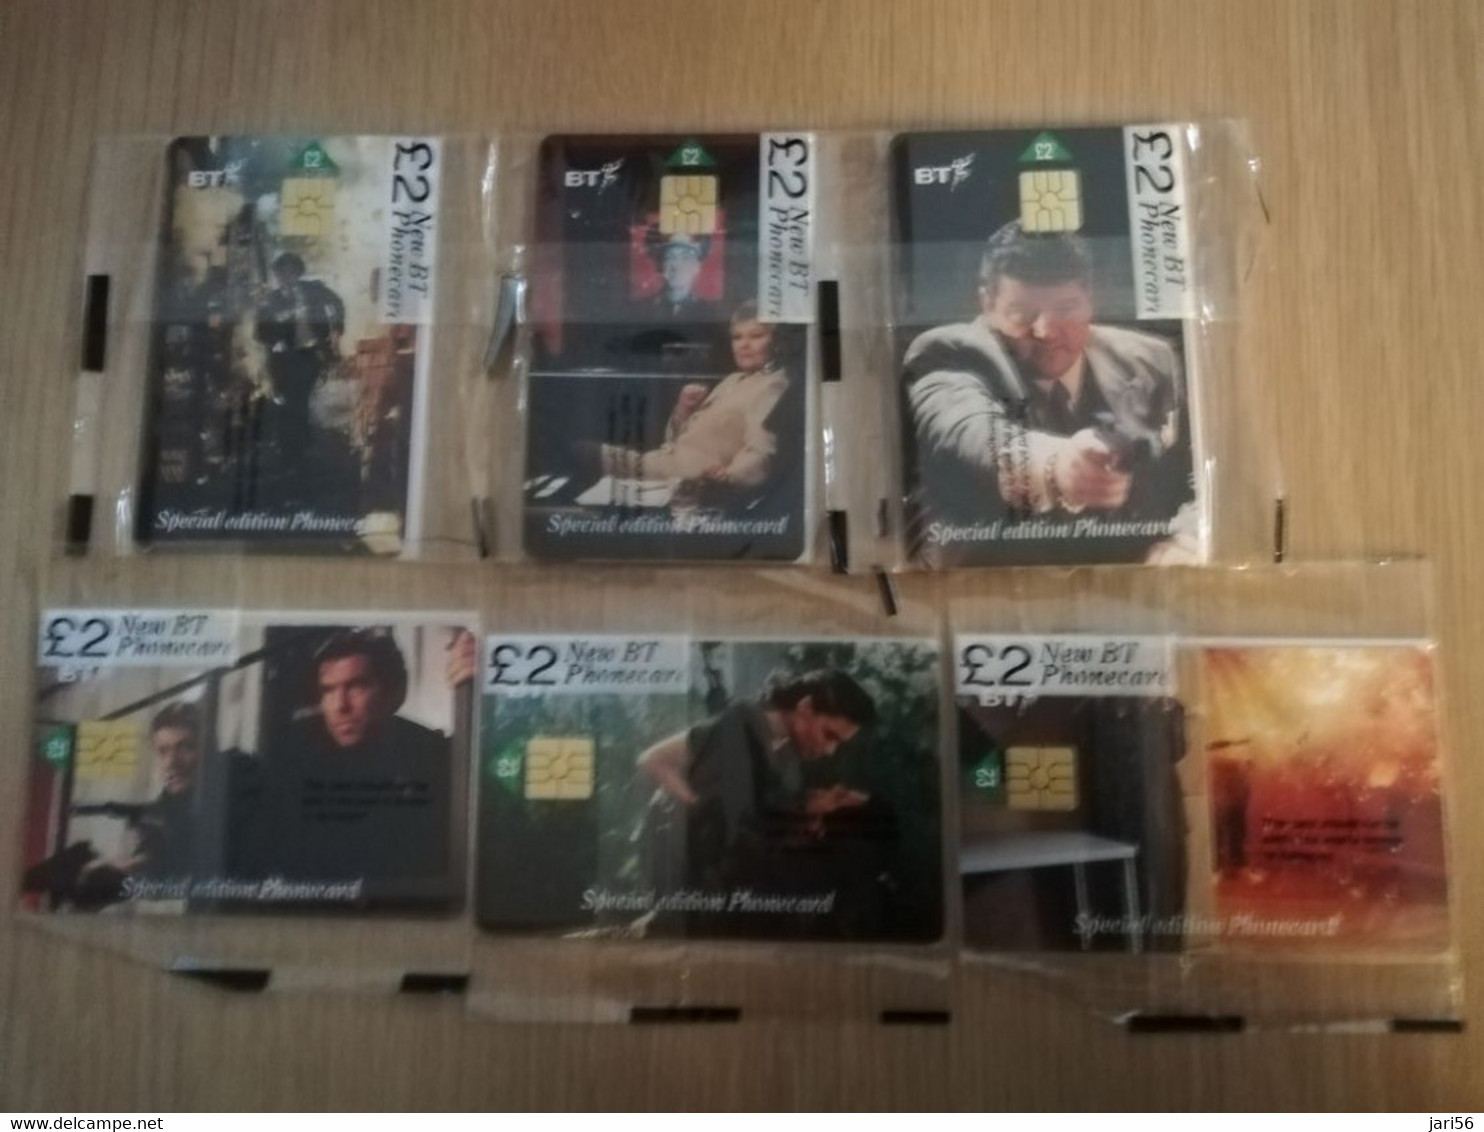 GREAT BRETAGNE  CHIPCARDS  JAMES BOND  GOLDEN EYE     SERIE 6X 2 POUND Sealed In Wrapper    MINT CONDITION      **3859** - BT Generales